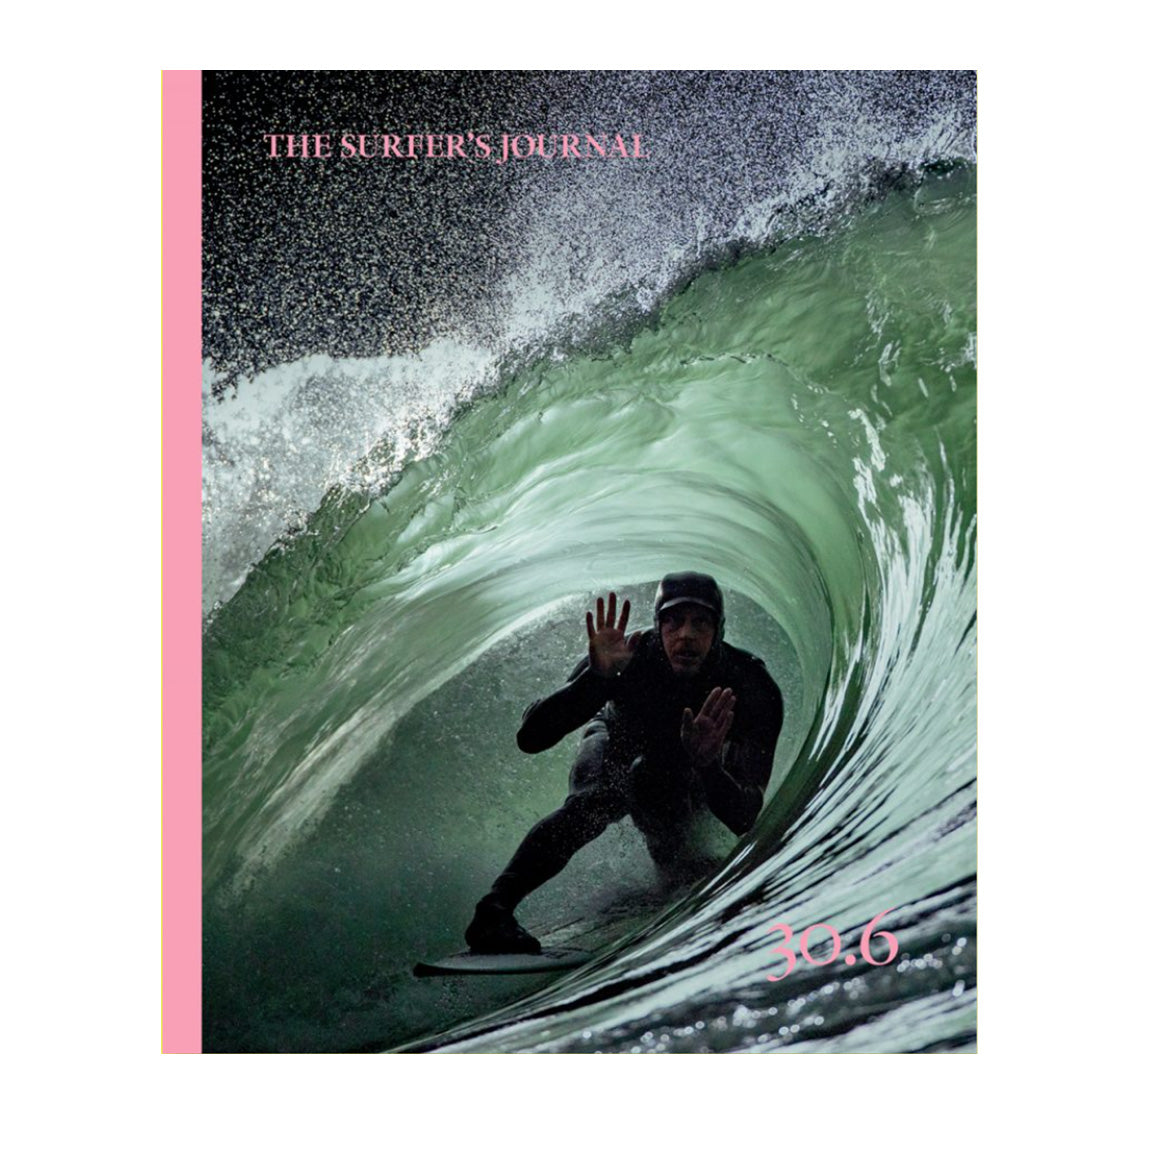 THE SURFER'S JOURNAL - ISSUE 30.6